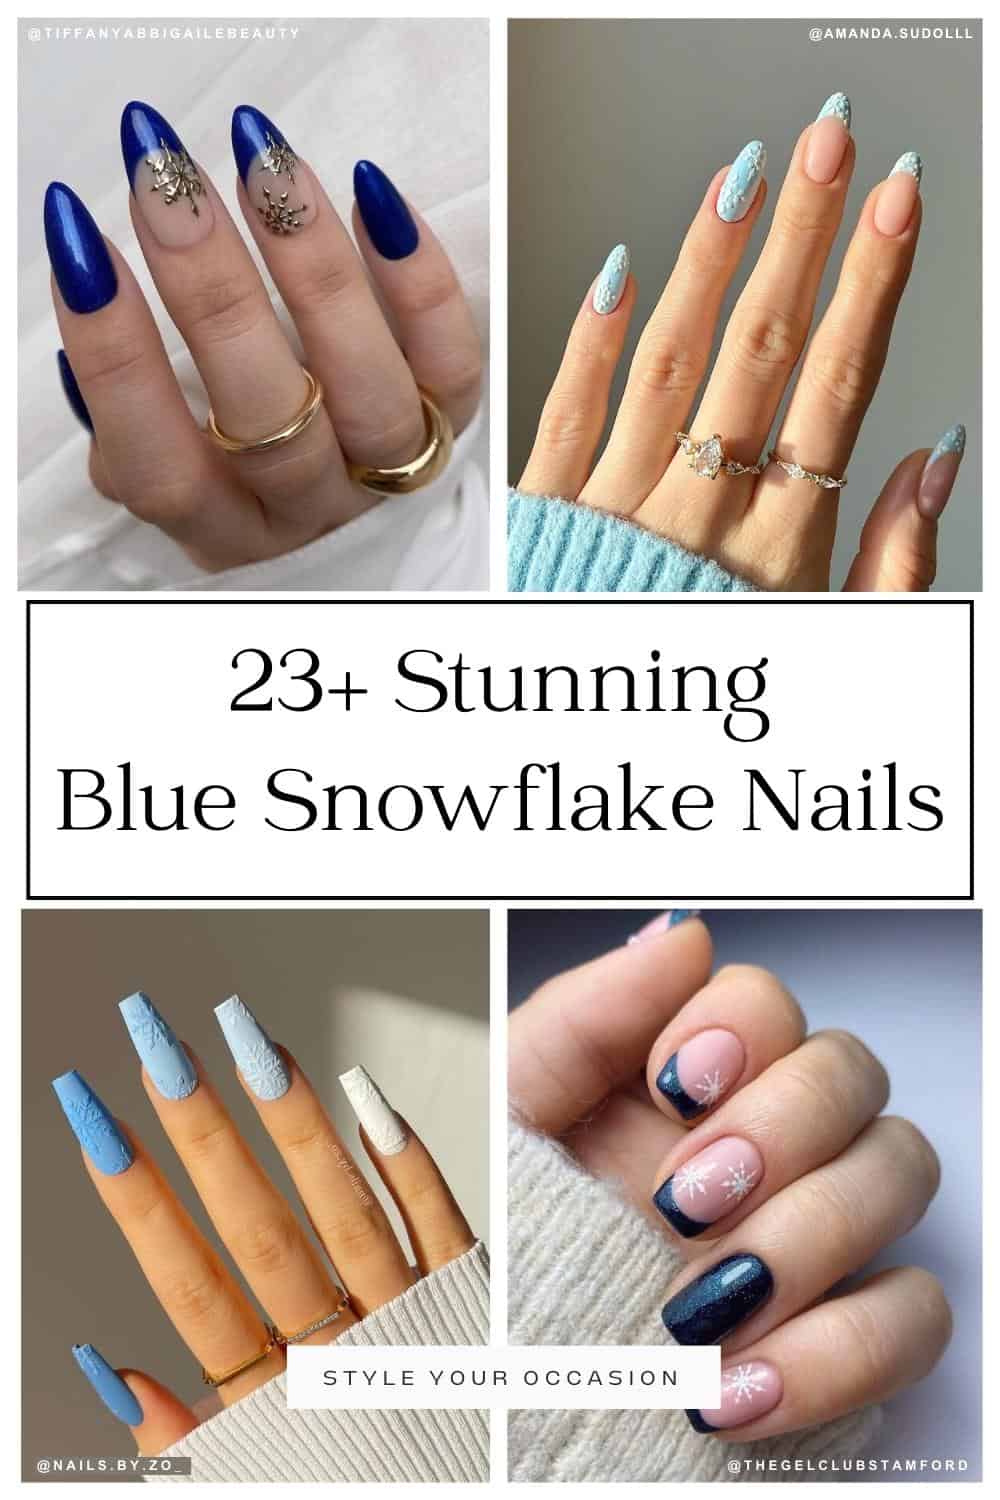 collage of four hands with blue nail designs with snowflake art